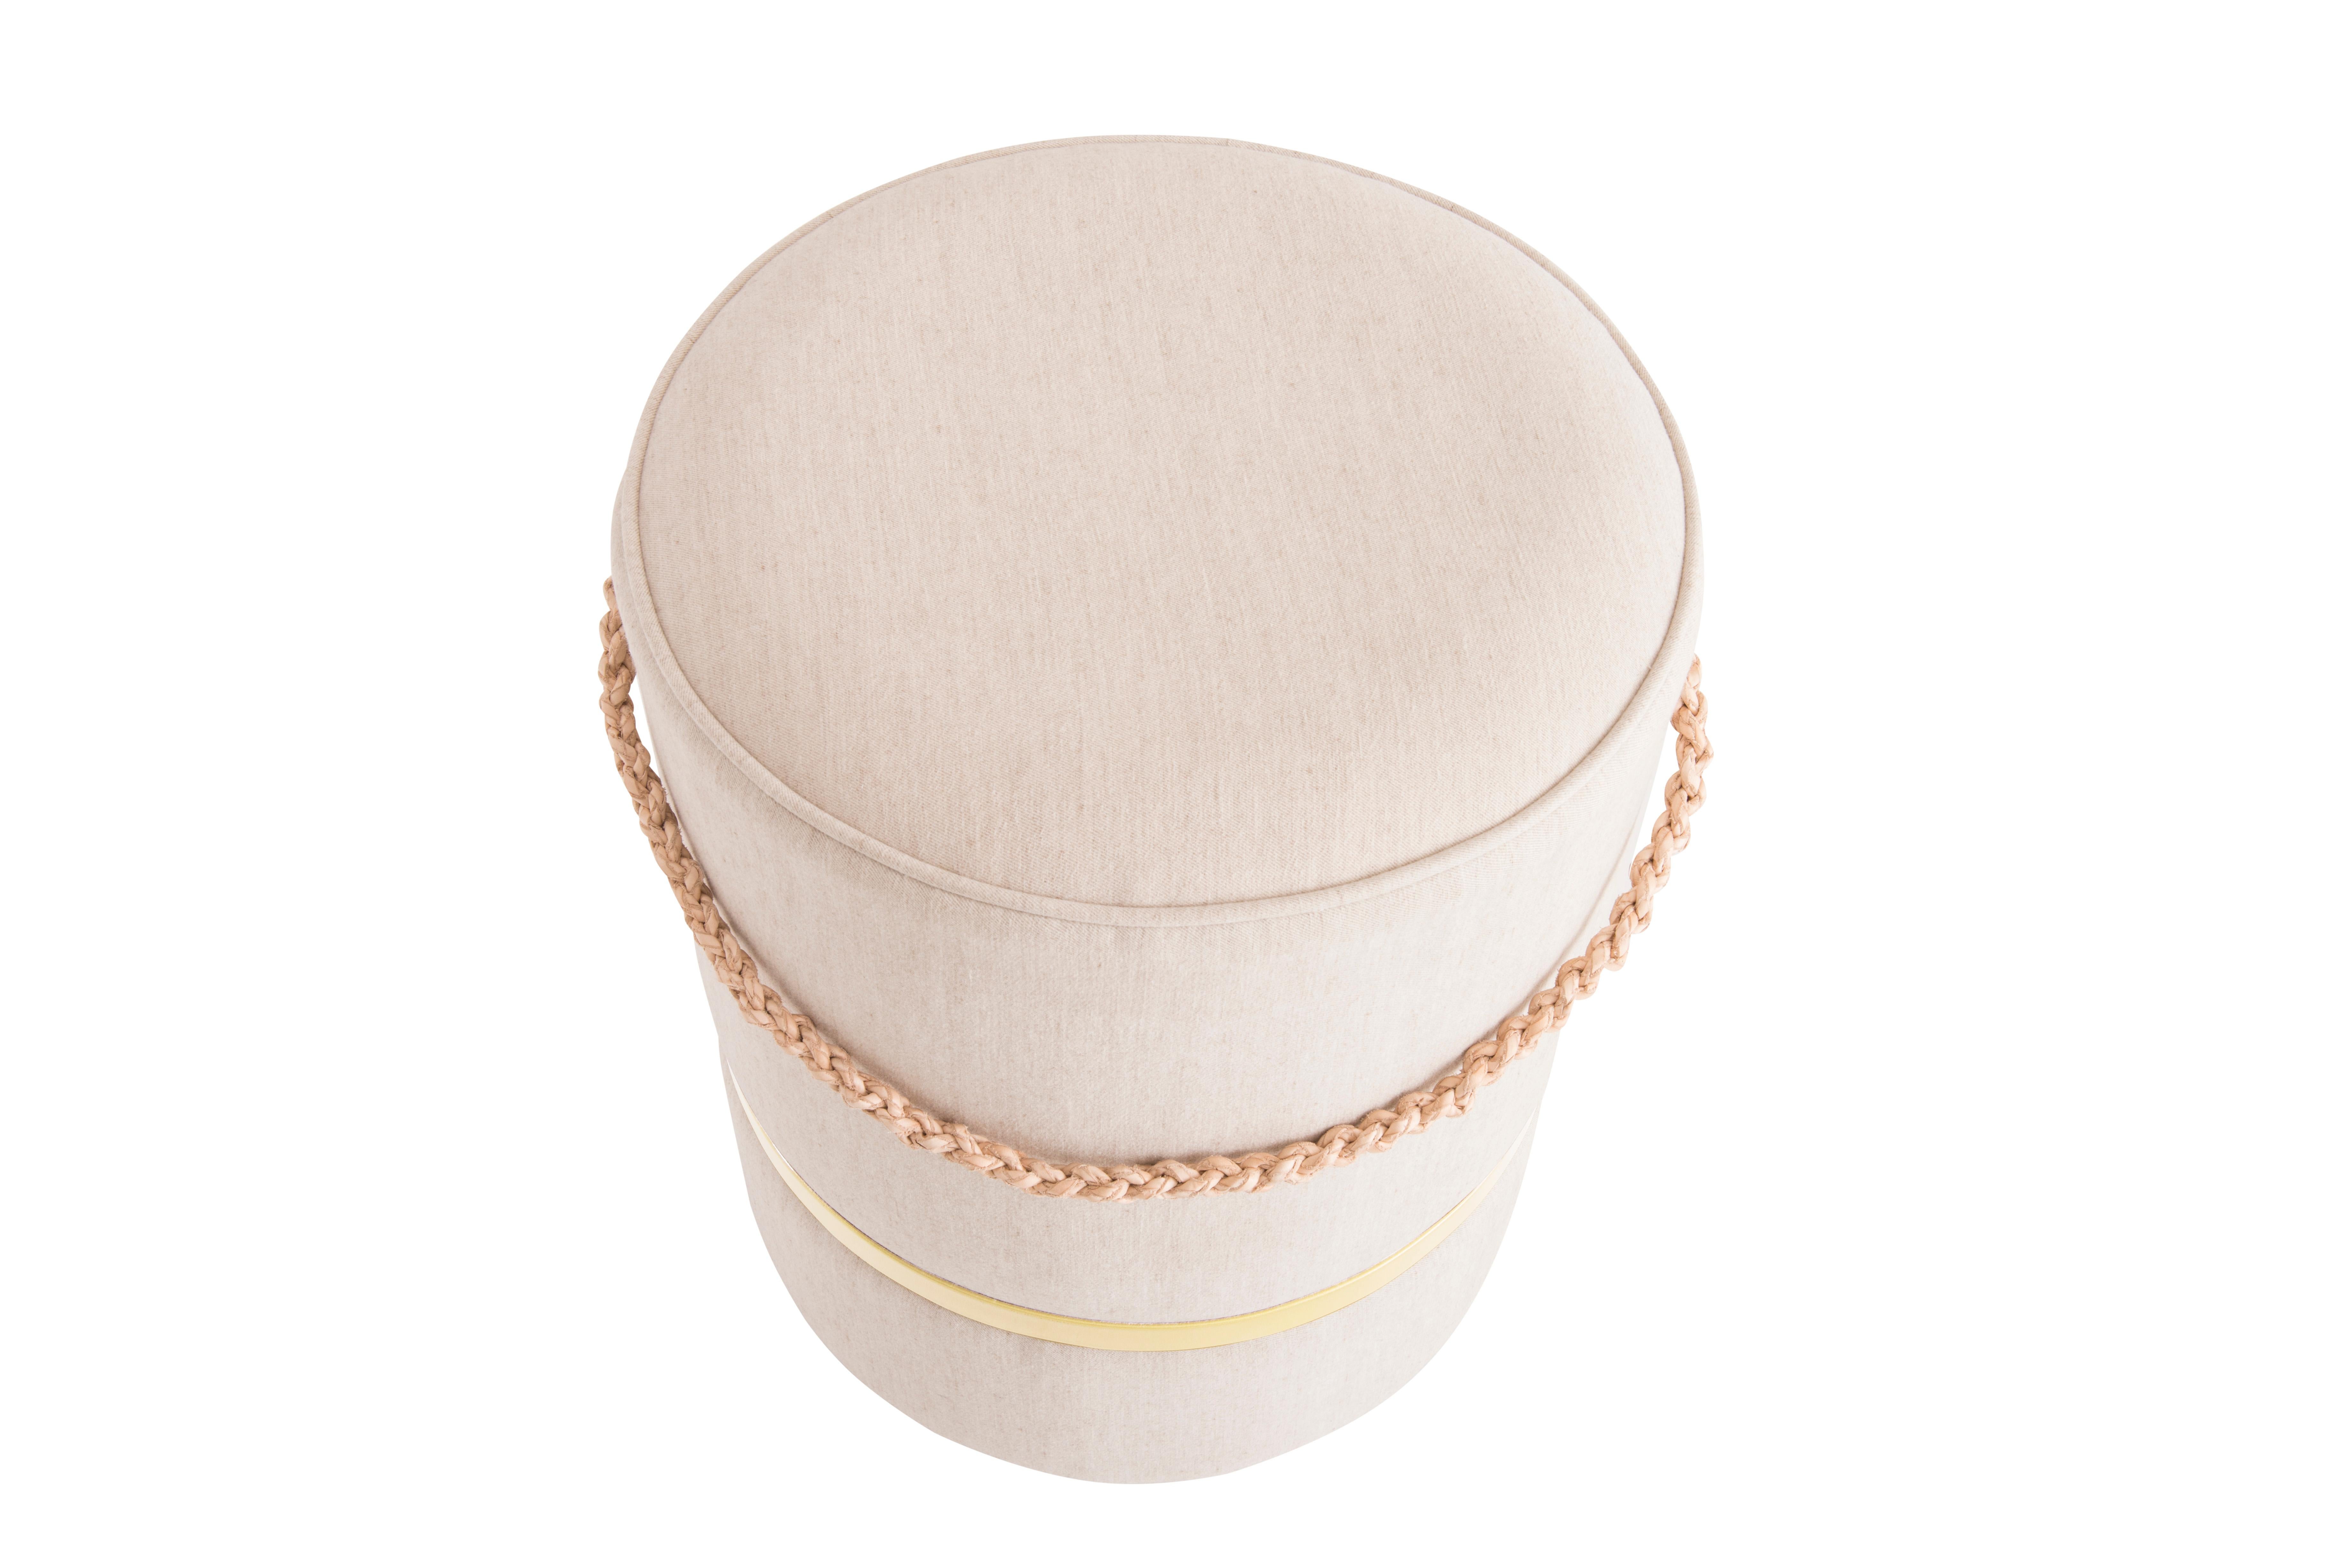 Product with admirable aesthetic, decorative and practical range, the Serena pouf is upholstered with natural color linen, gold-plated ring and hand-knotted in natural leather without dyeing - its objective is the exalted beauty in the oxidation of